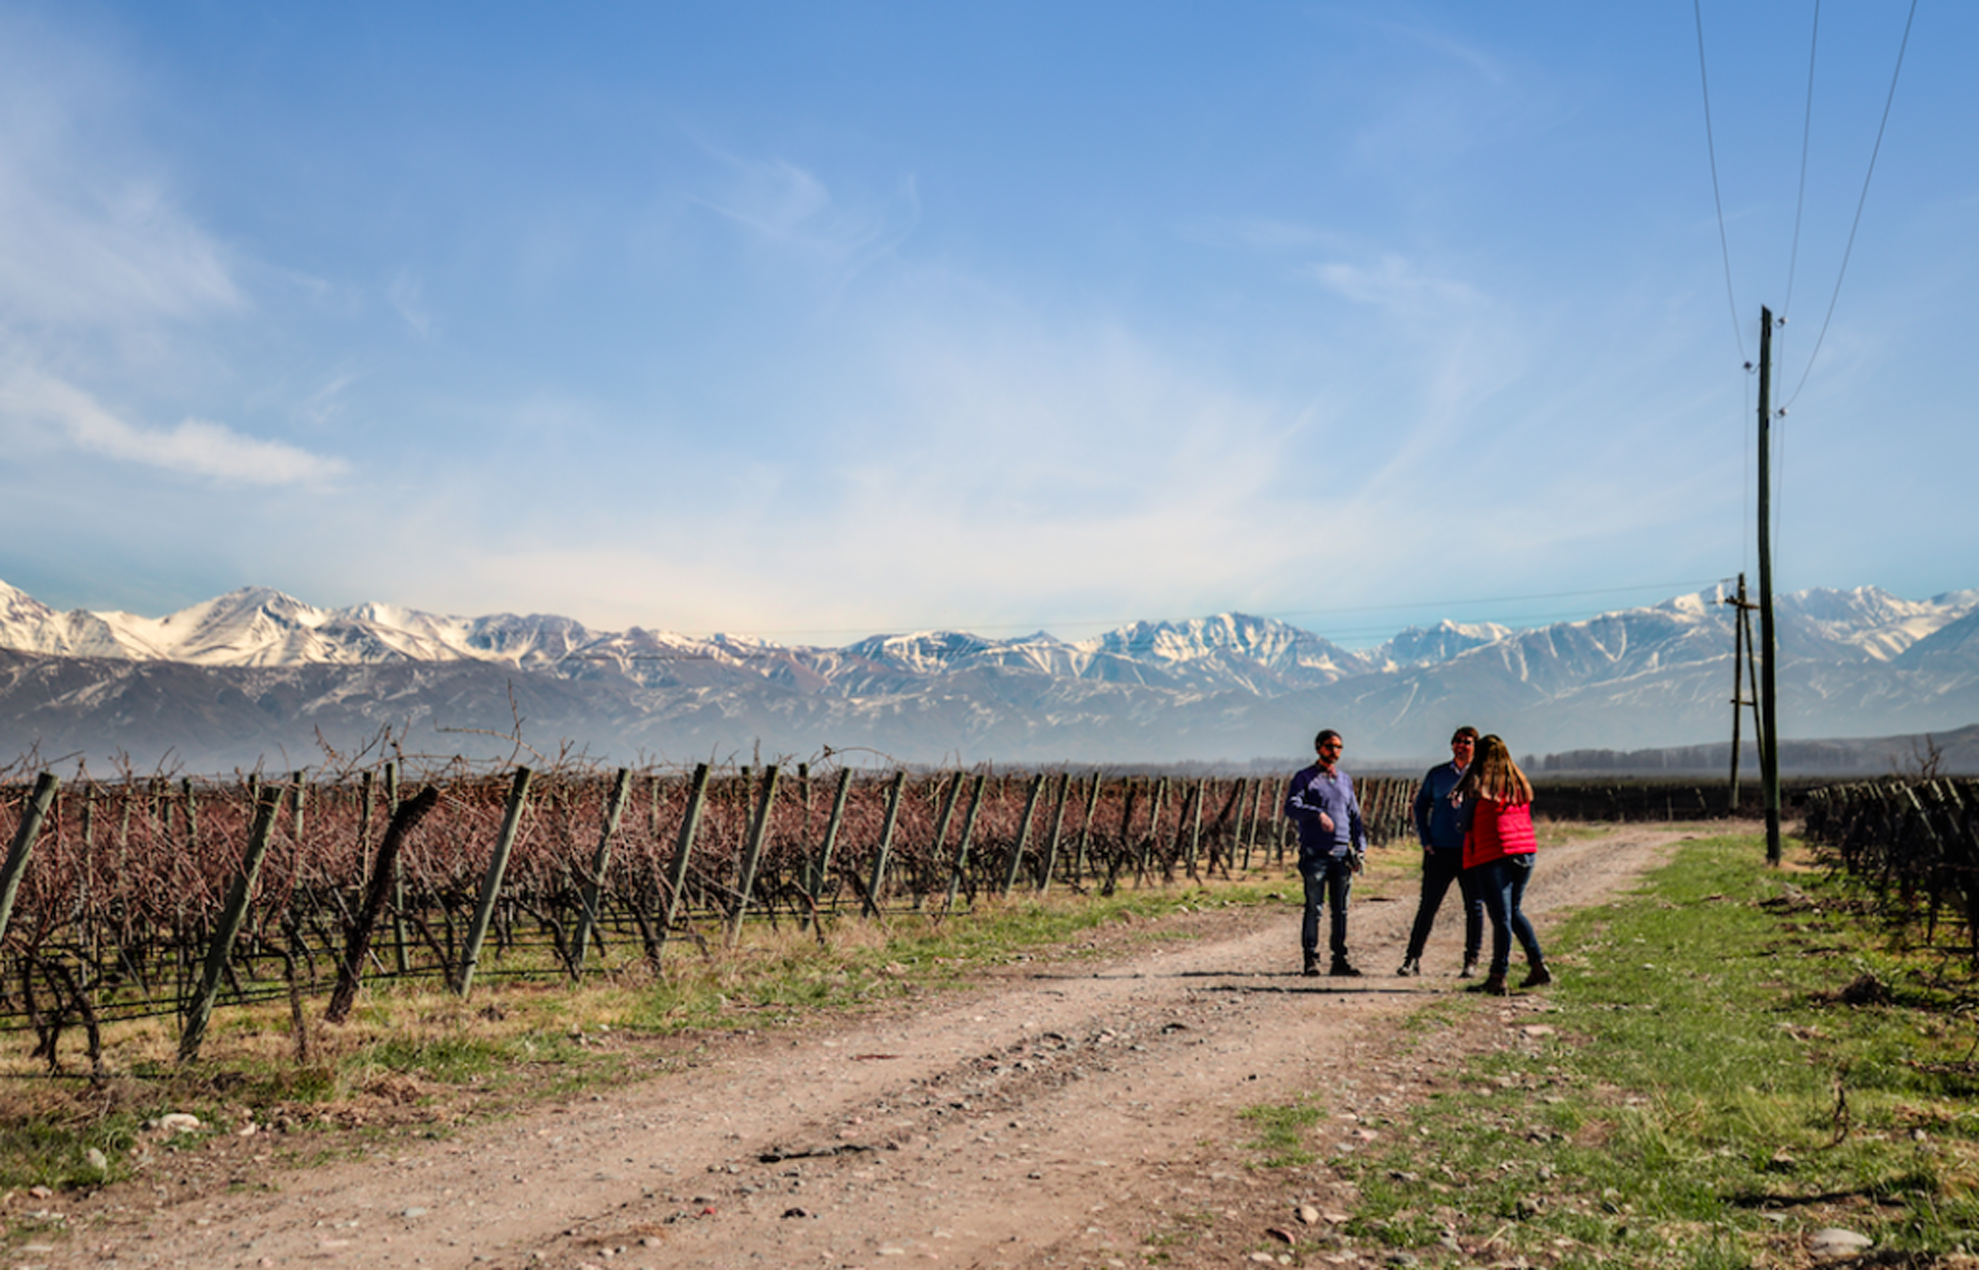 Landscape view of grape vine rows and people gathered with a mountain range background.